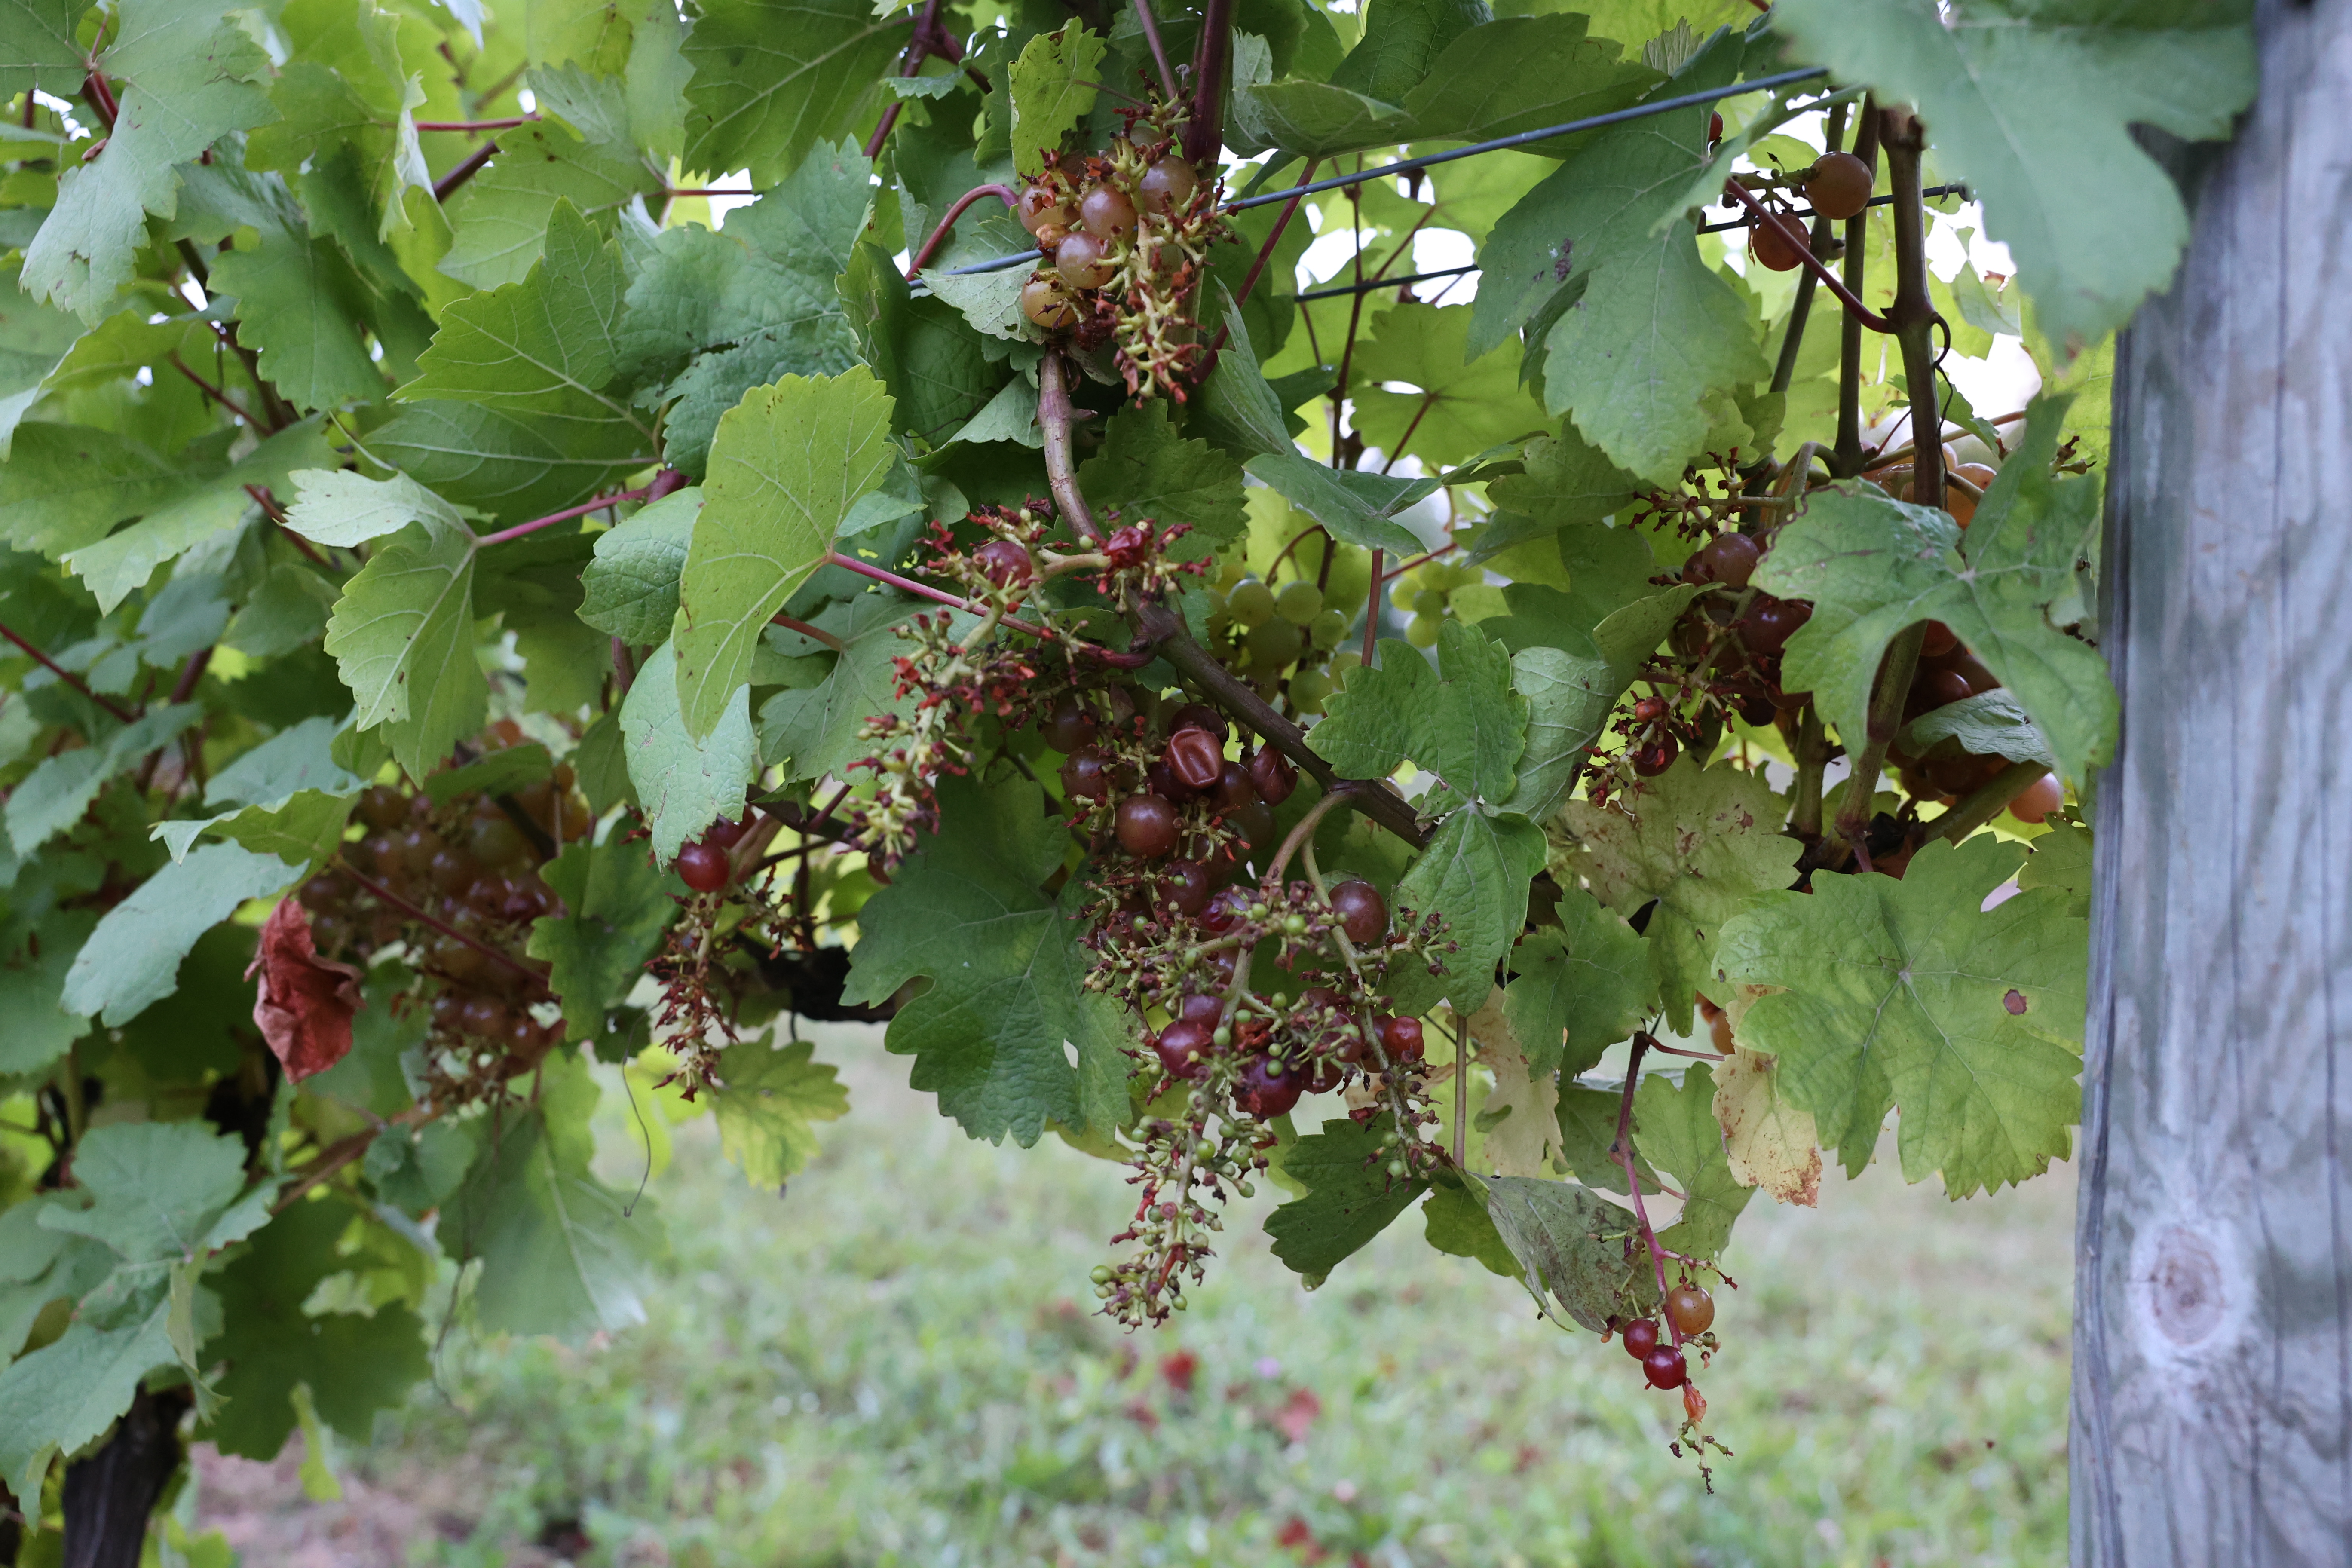 A cluster of grapes that had been eaten by birds.